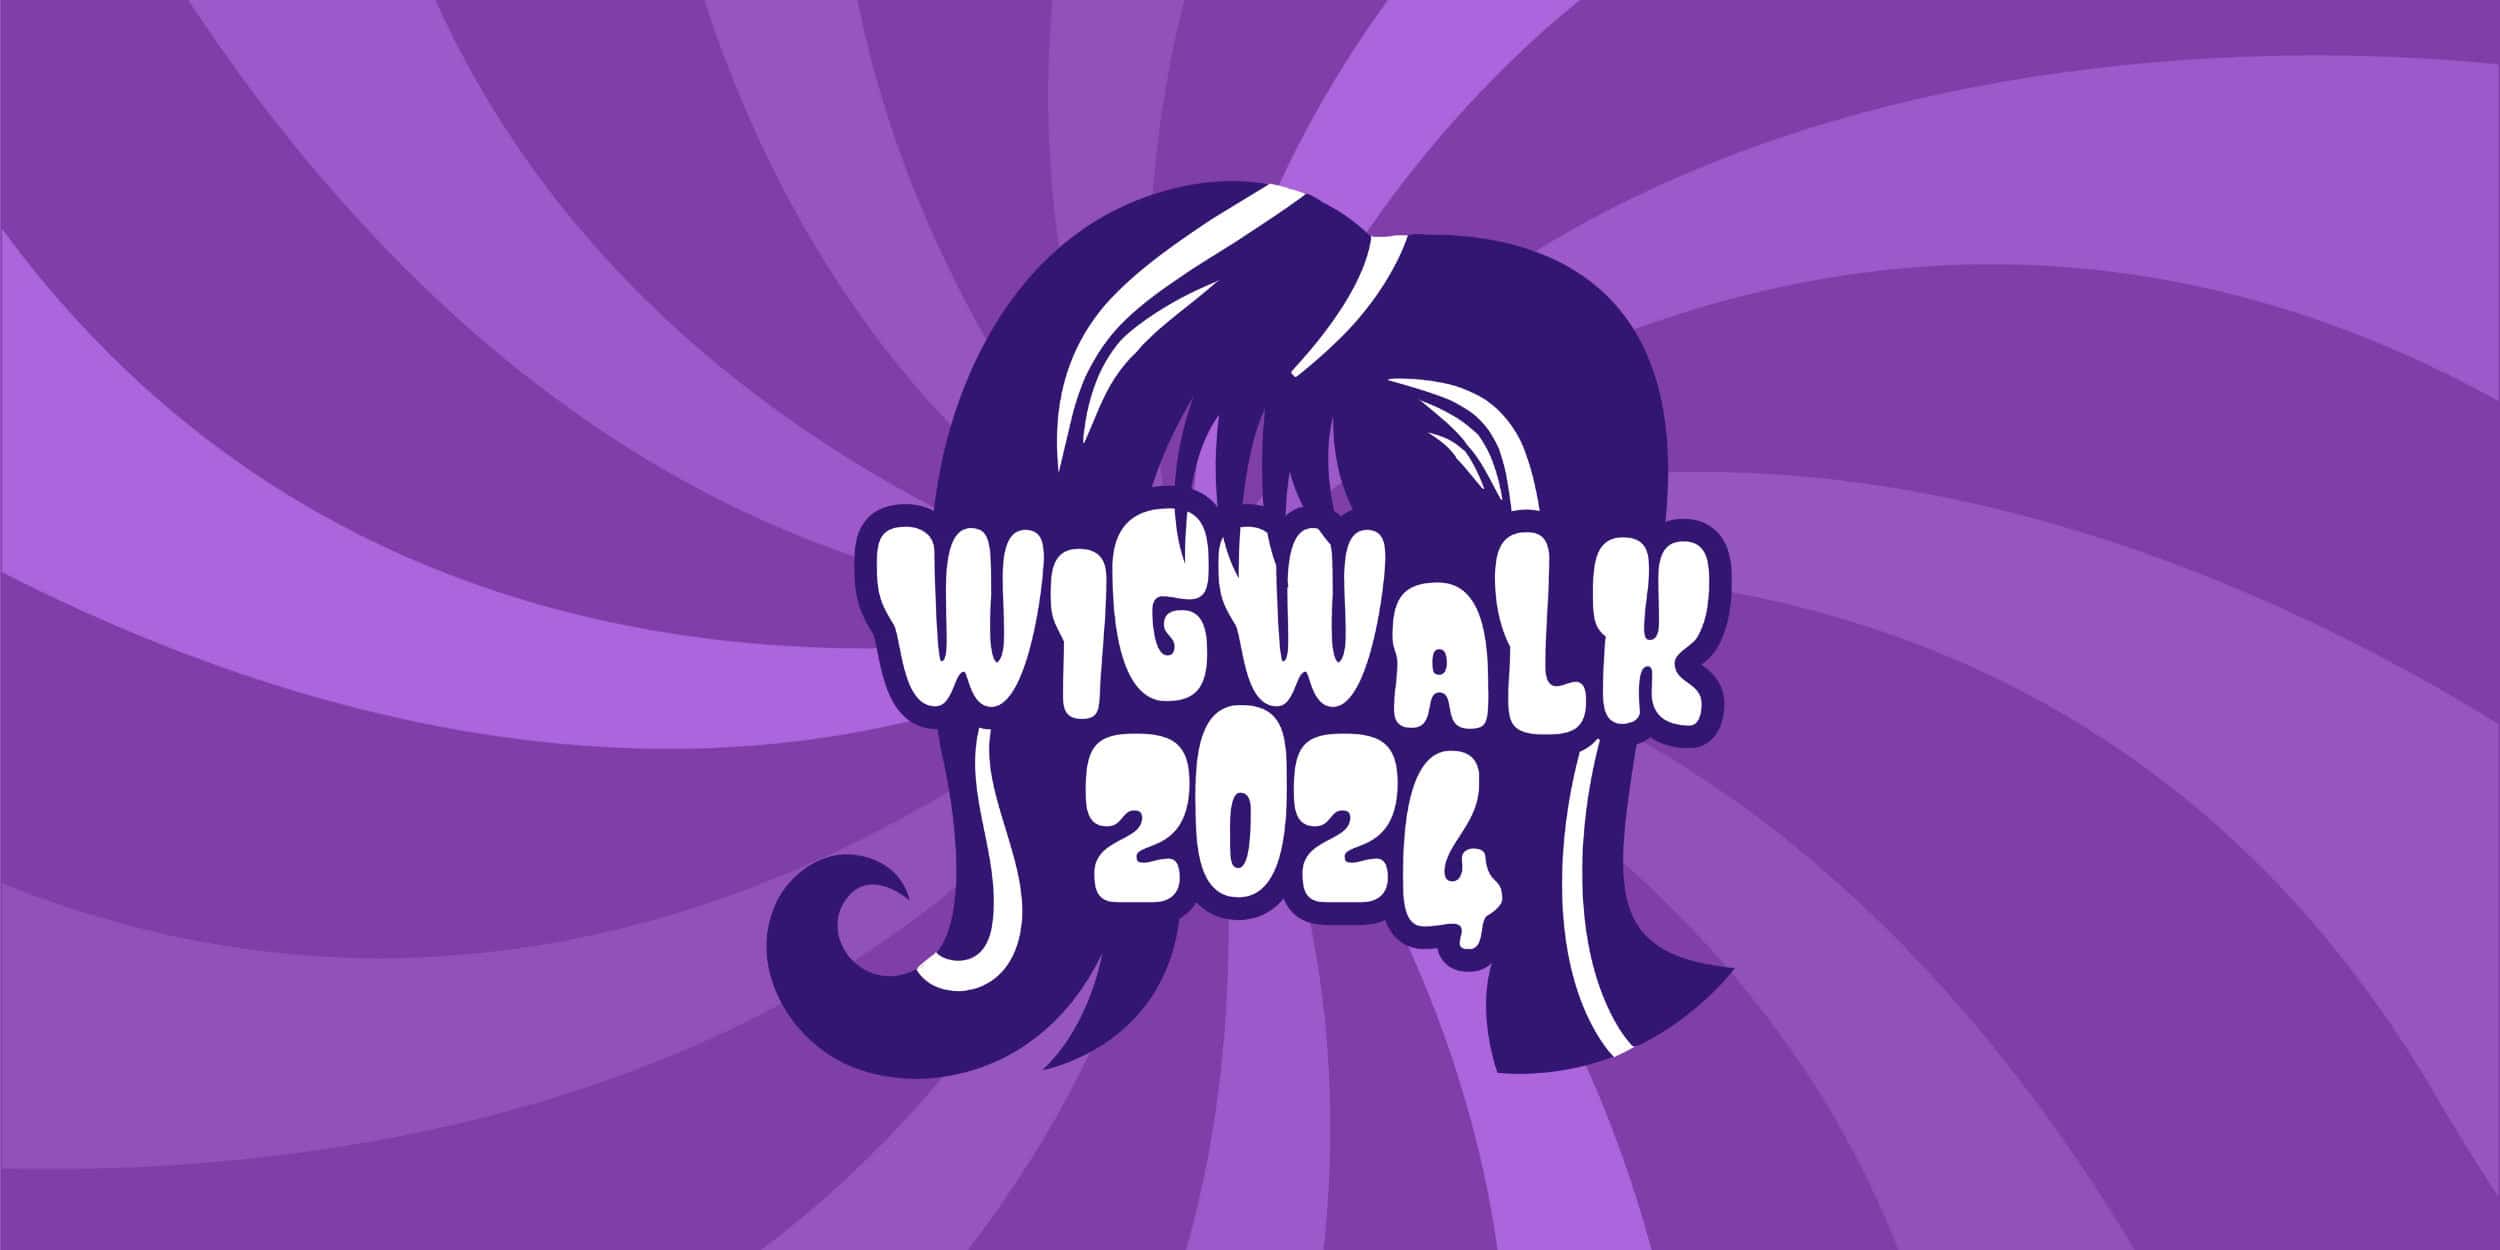 Logo for Wigwalk 2024 featuring stylized hair graphic on a purple swirl background.